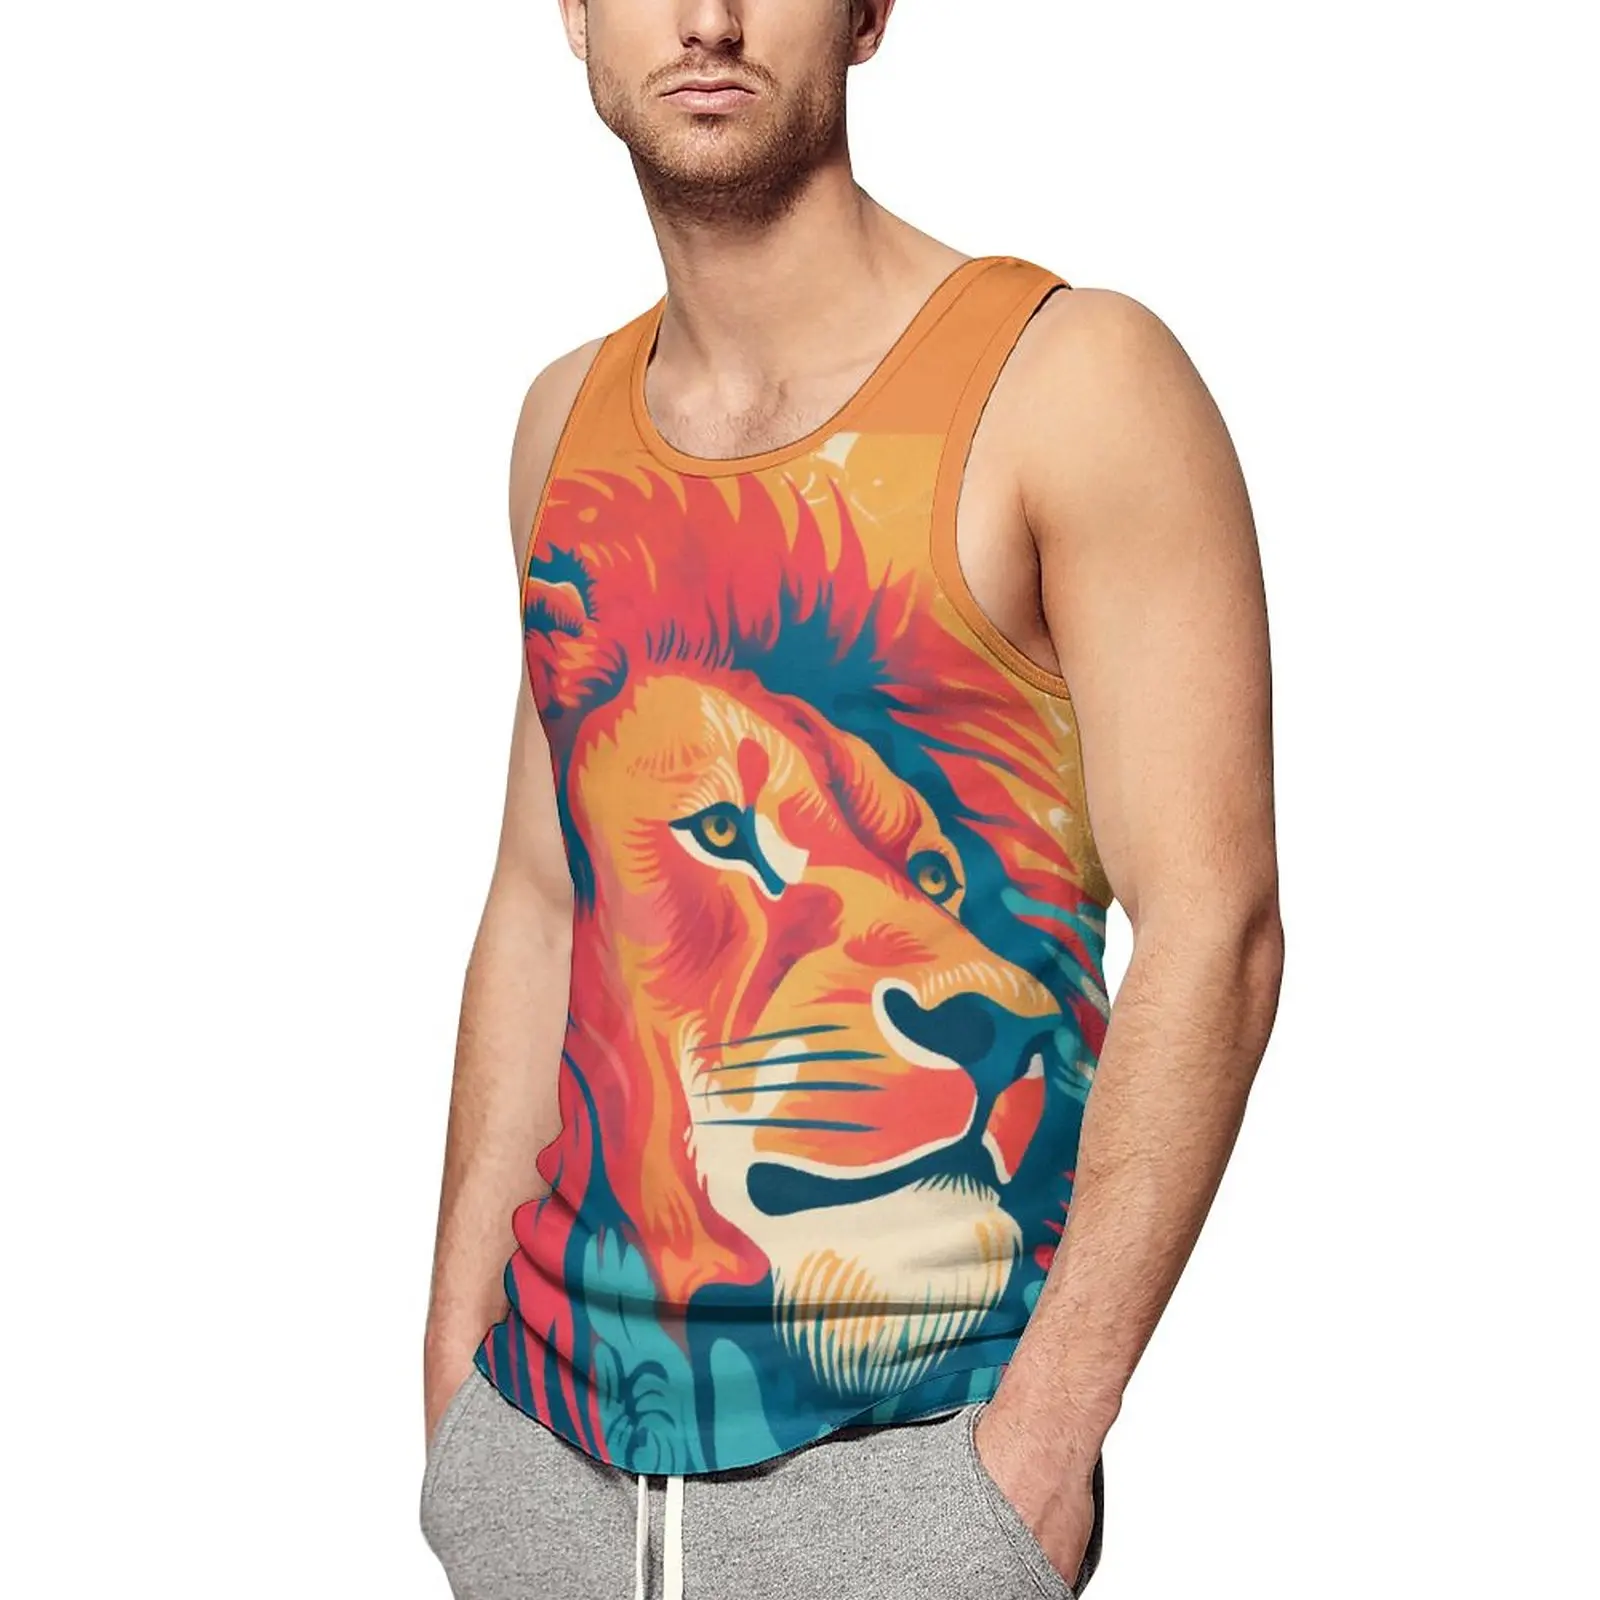 

Lion Tank Top Mens Neo Fauvism Tops Summer Printed Gym Sportswear Oversized Sleeveless Vests